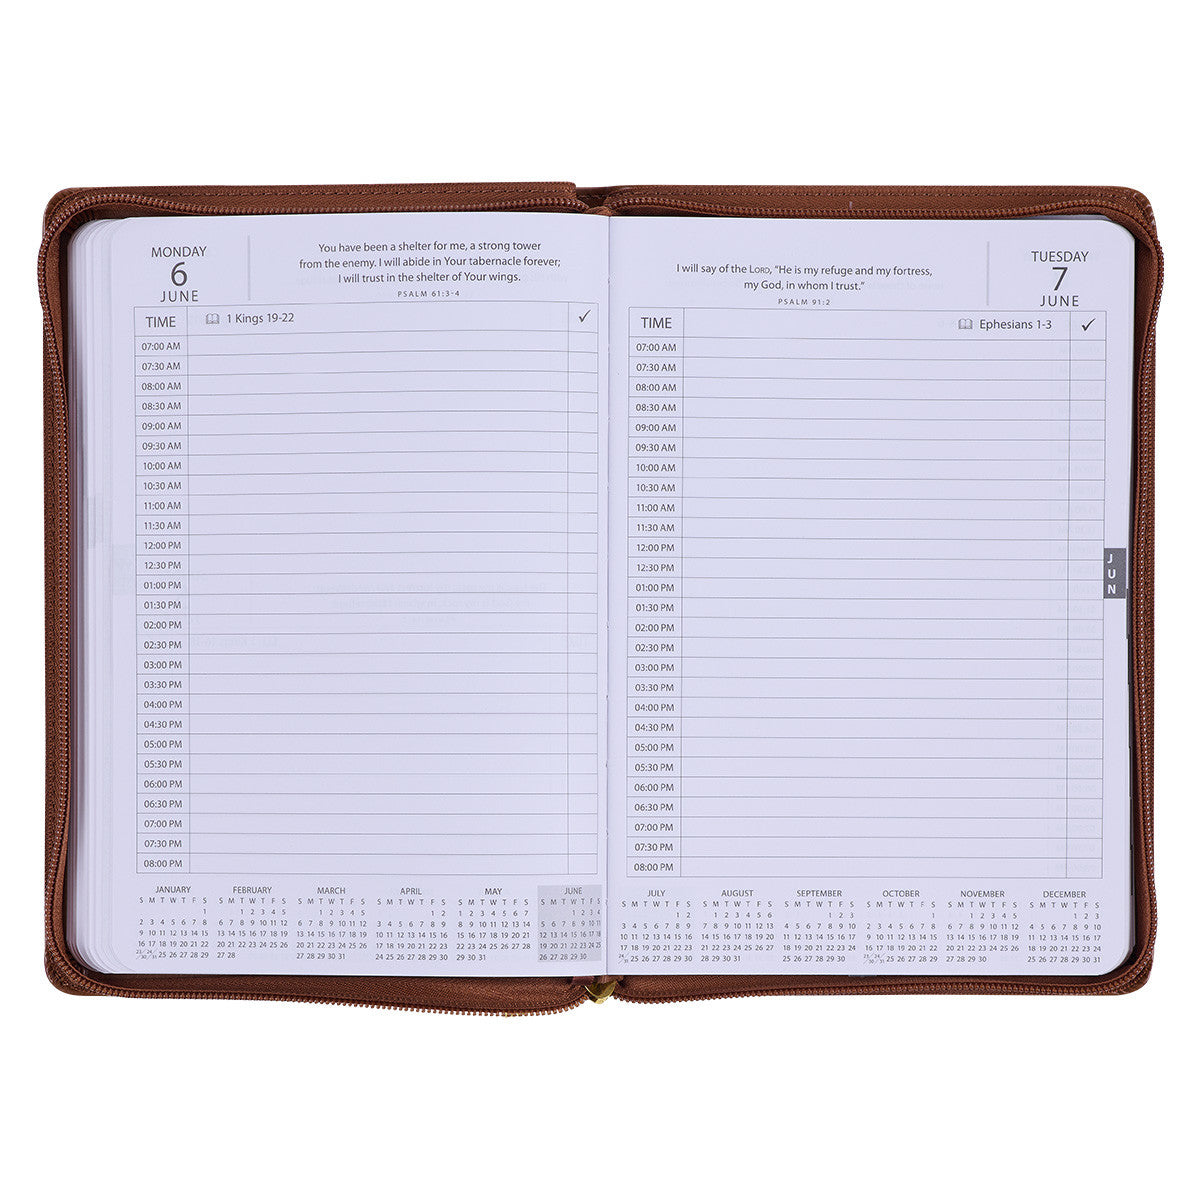 Refuge and Strength Brown Faux Leather Zippered Executive Planner - 2022